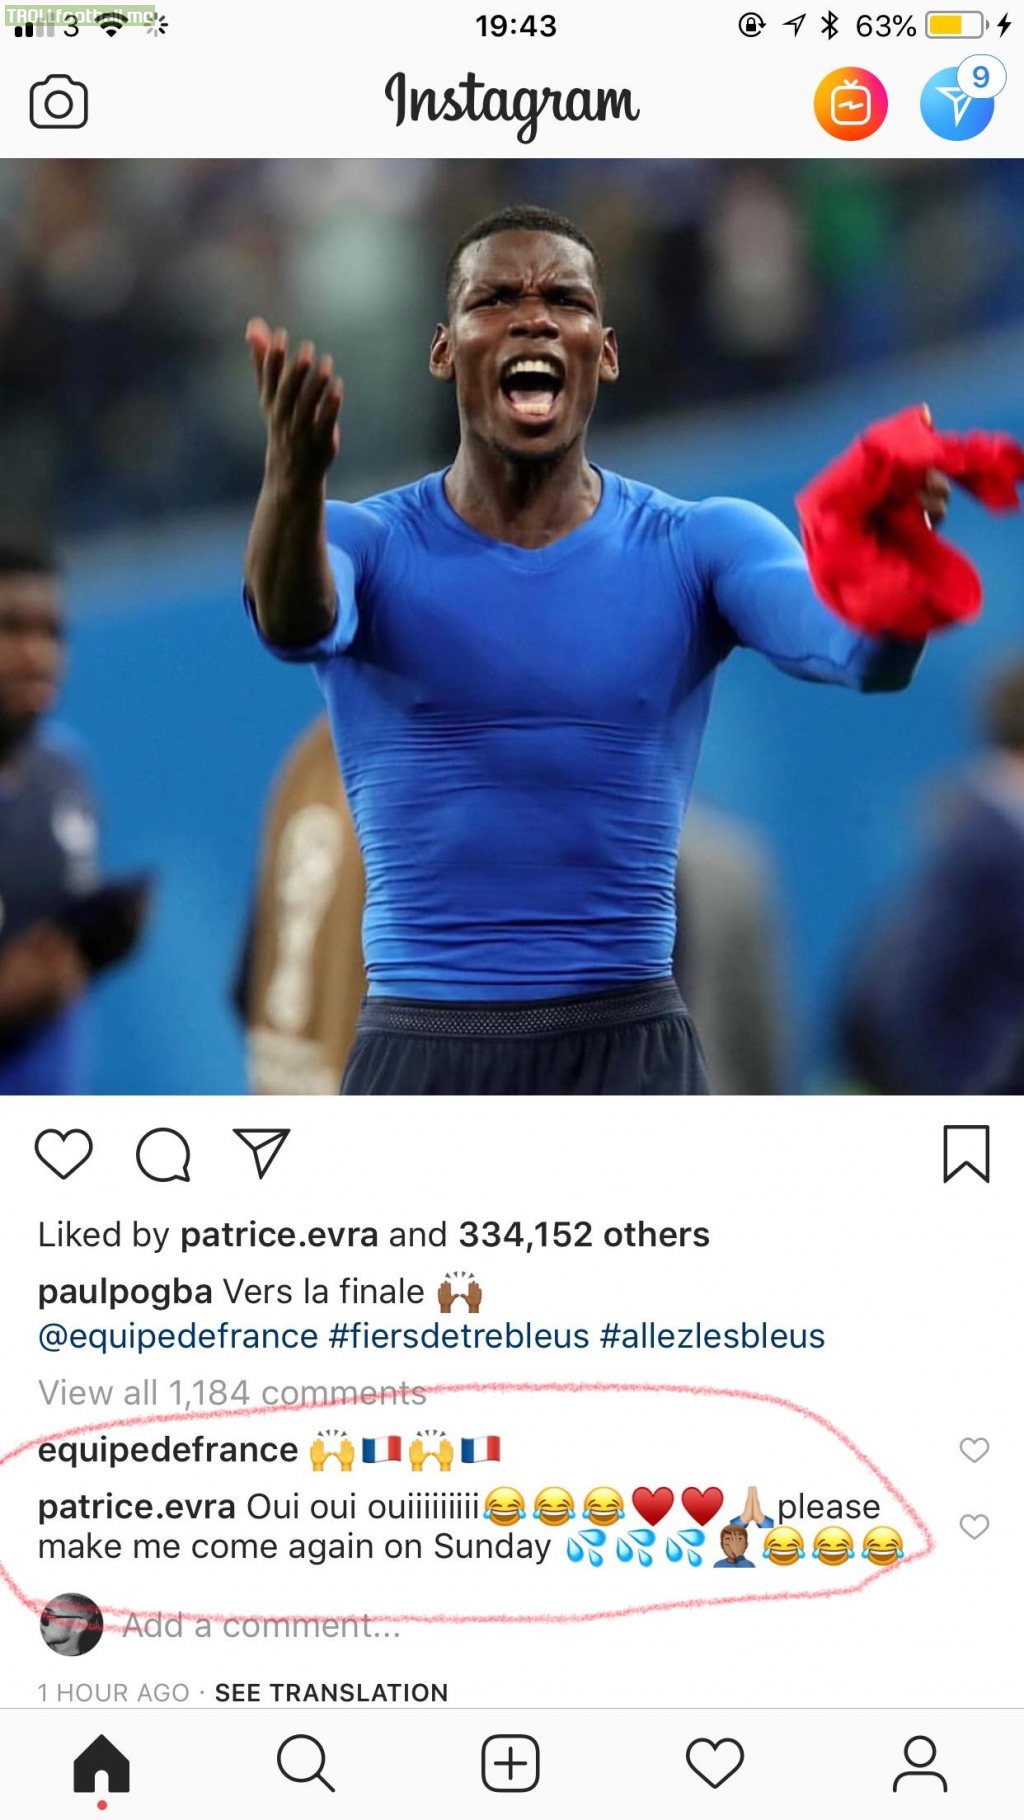 Patrice Evra with the nutty comment on Pogbas post